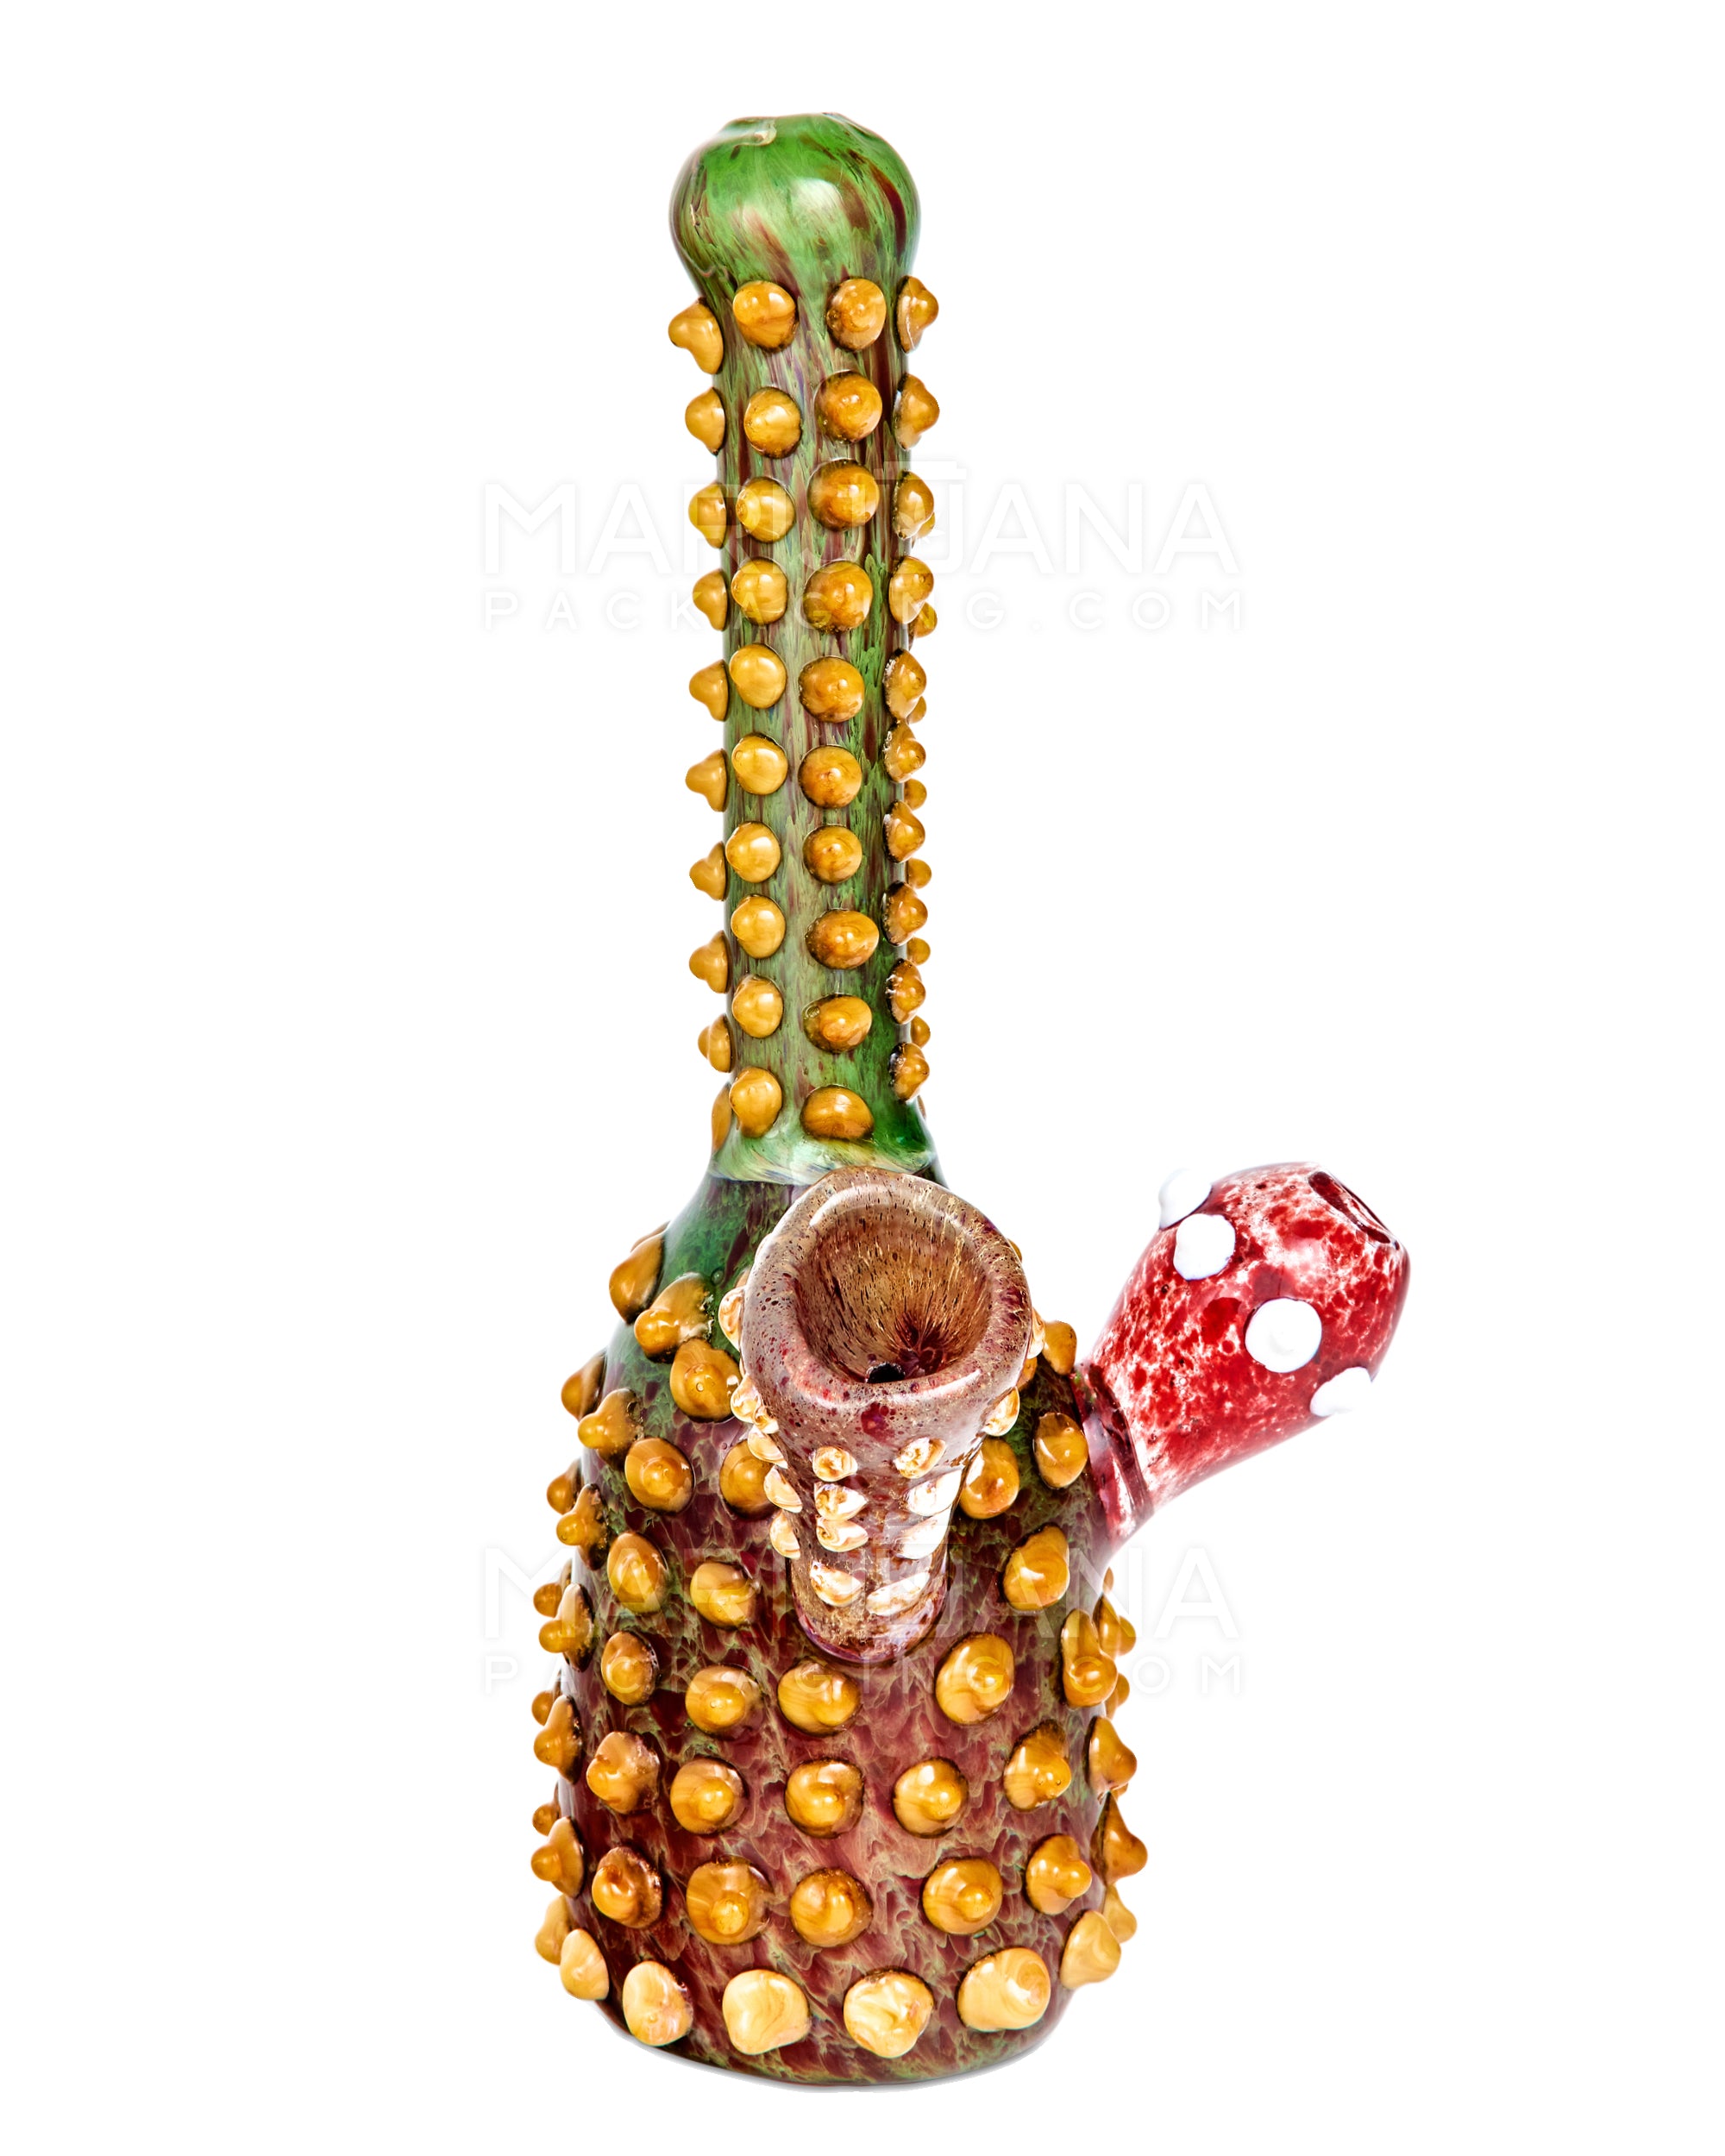 Heady | Straight Neck Color Pull Barnacle Beaded Thick Glass Water Pipe | 9.5in Tall - Glass Carb Hole - Green & Red - 2